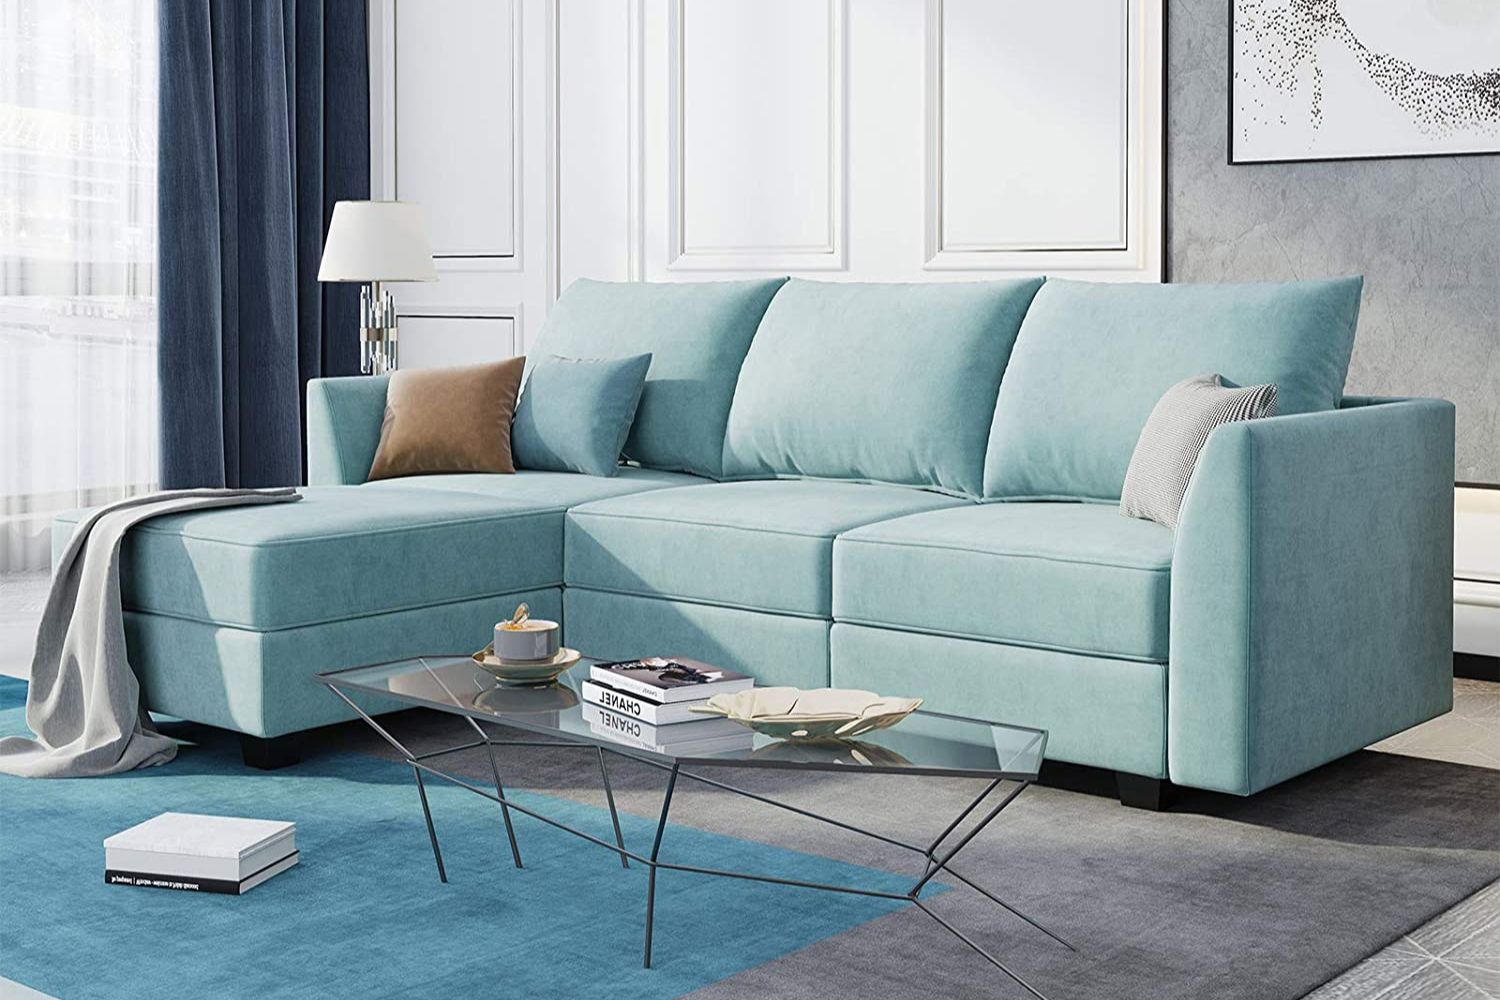 The Best Couches Under 1000 Options: HONBAY Reversible Sectional Sofa